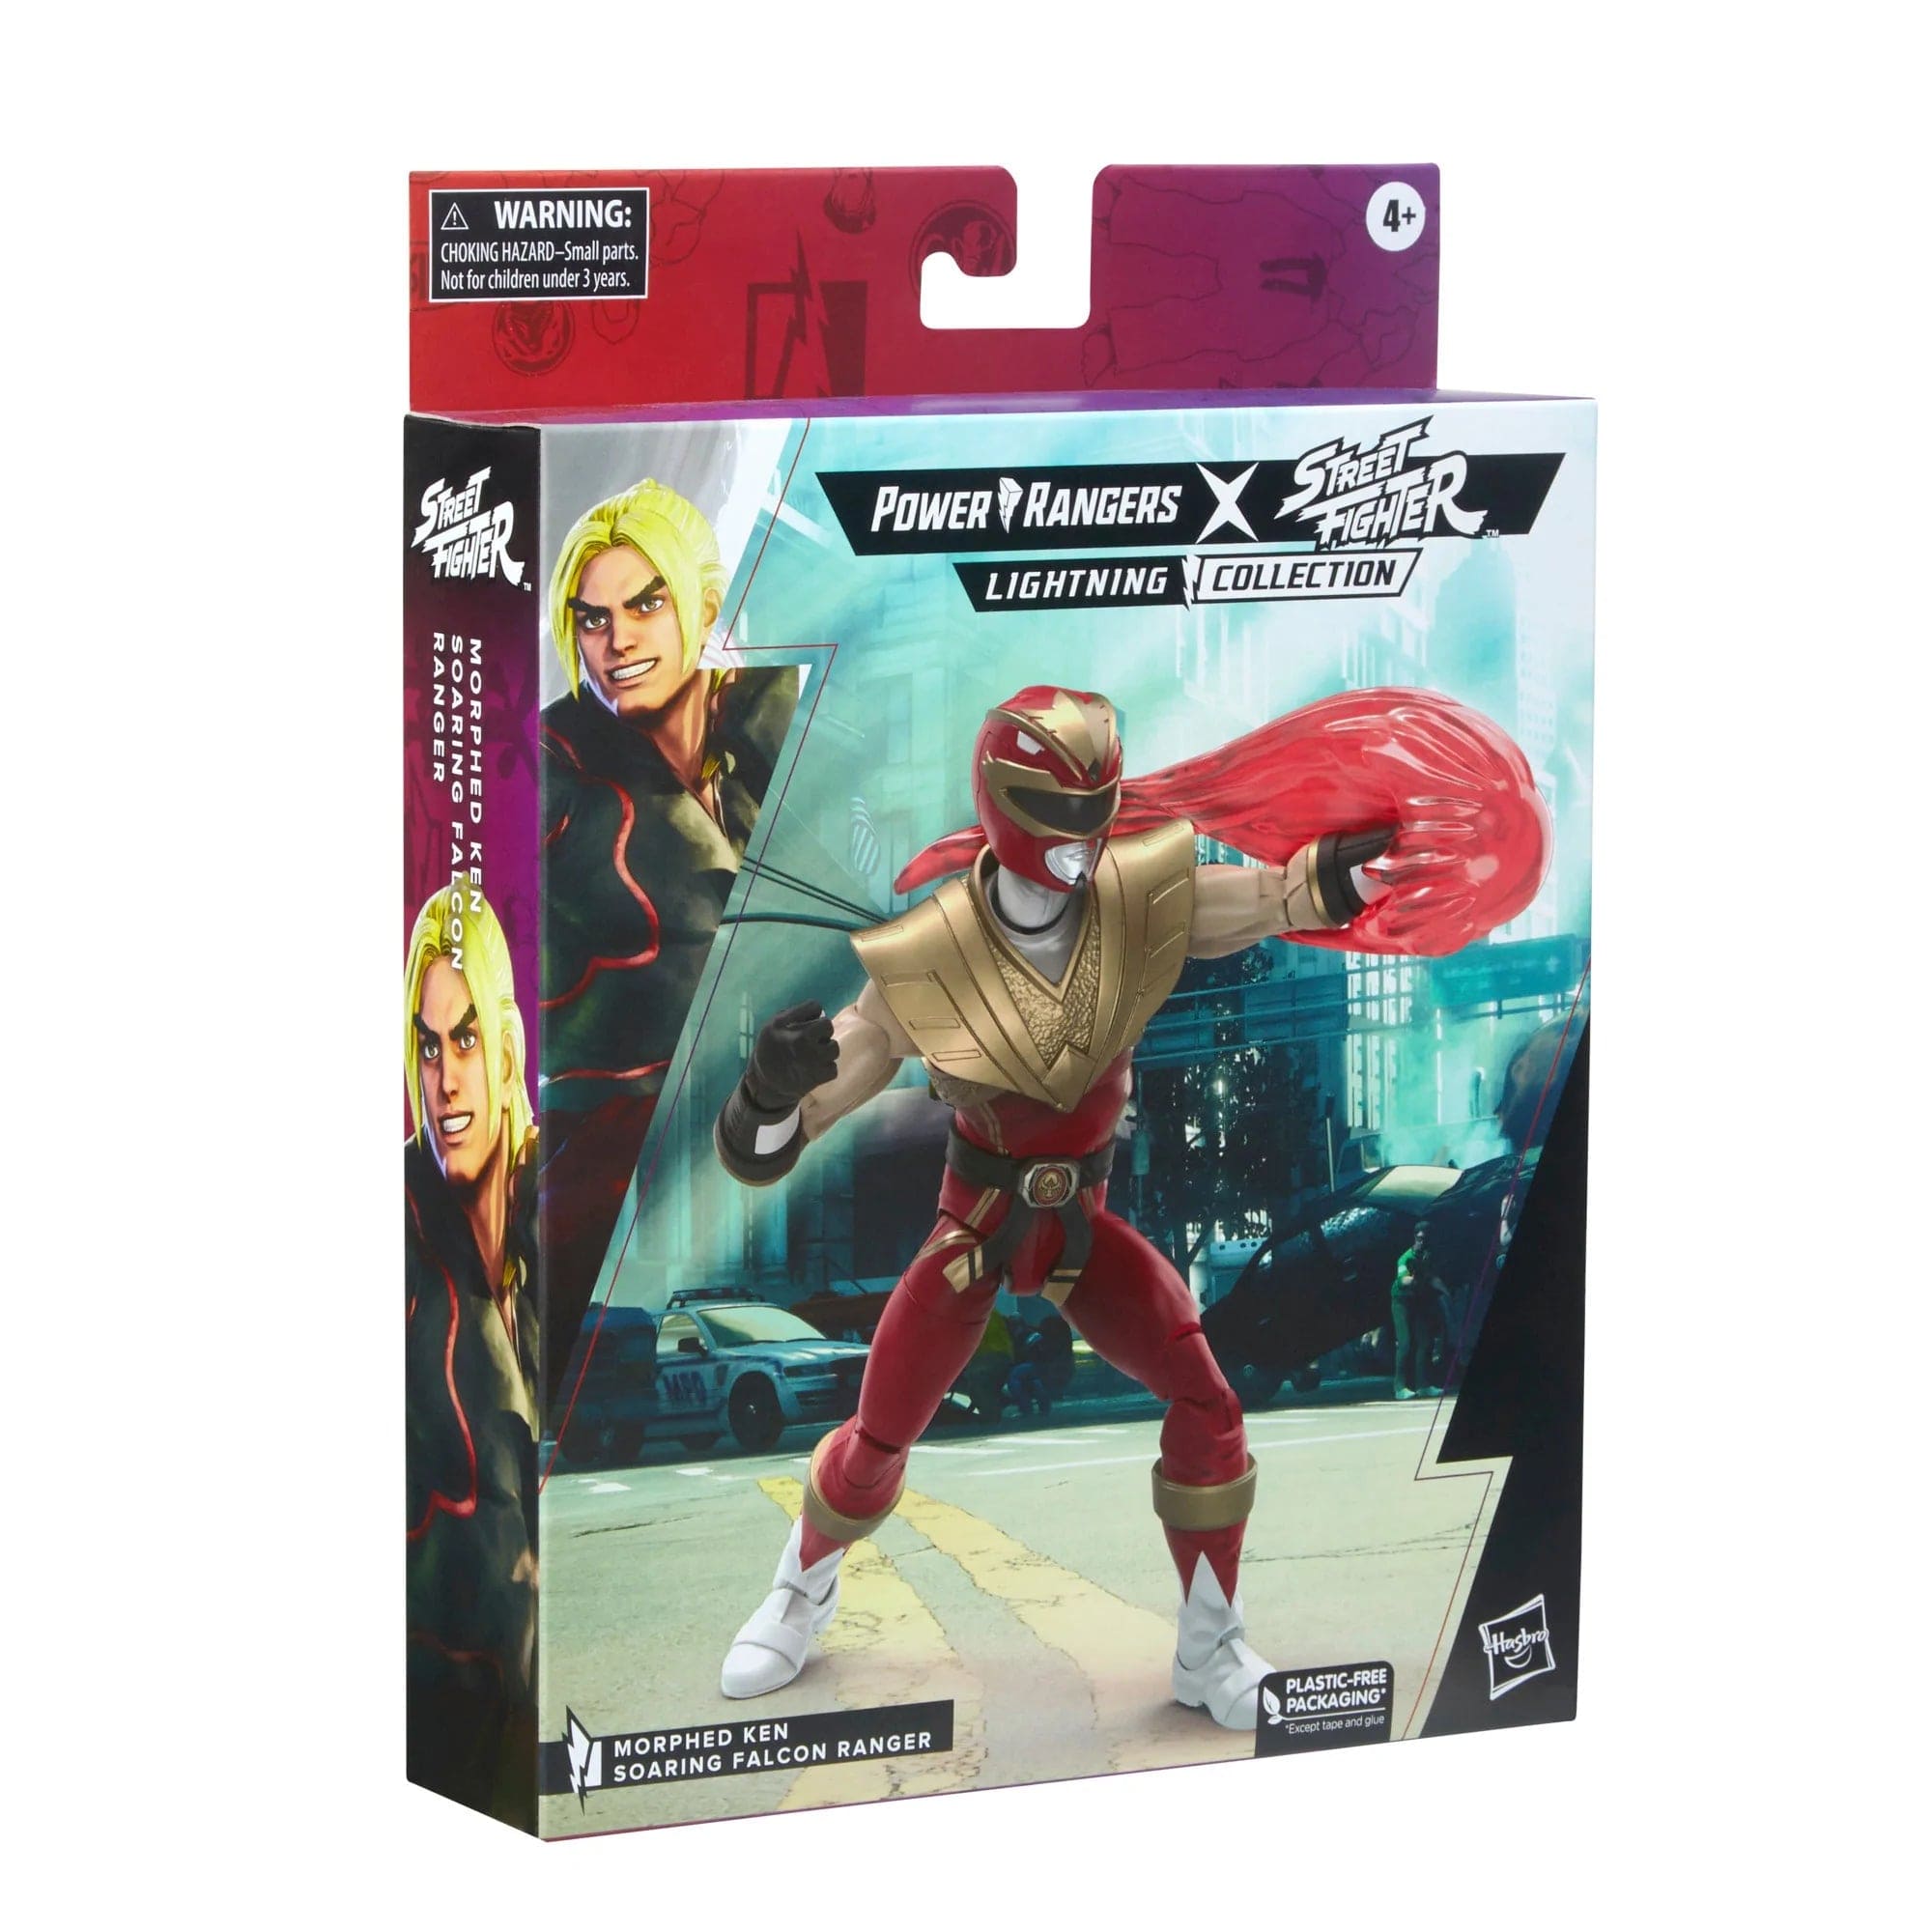 Power Rangers X Street Fighter Lightning Collection Morphed Ken Soaring Falcon Media Imagery 